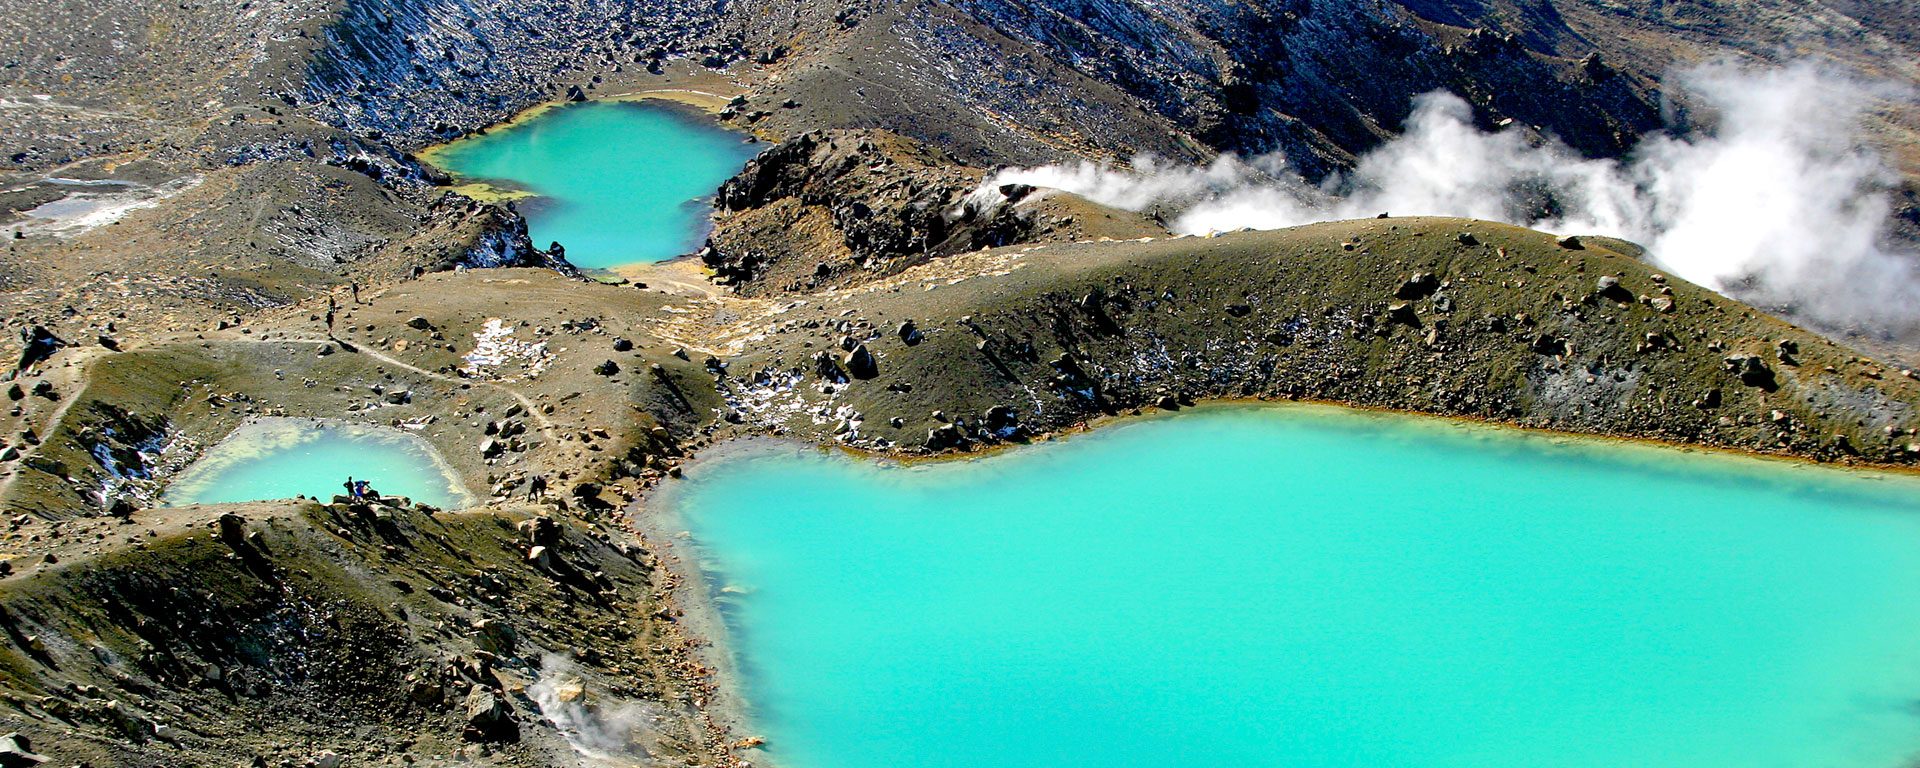 The Emerald Lakes in New Zealand's Tongariro National Park, North Island